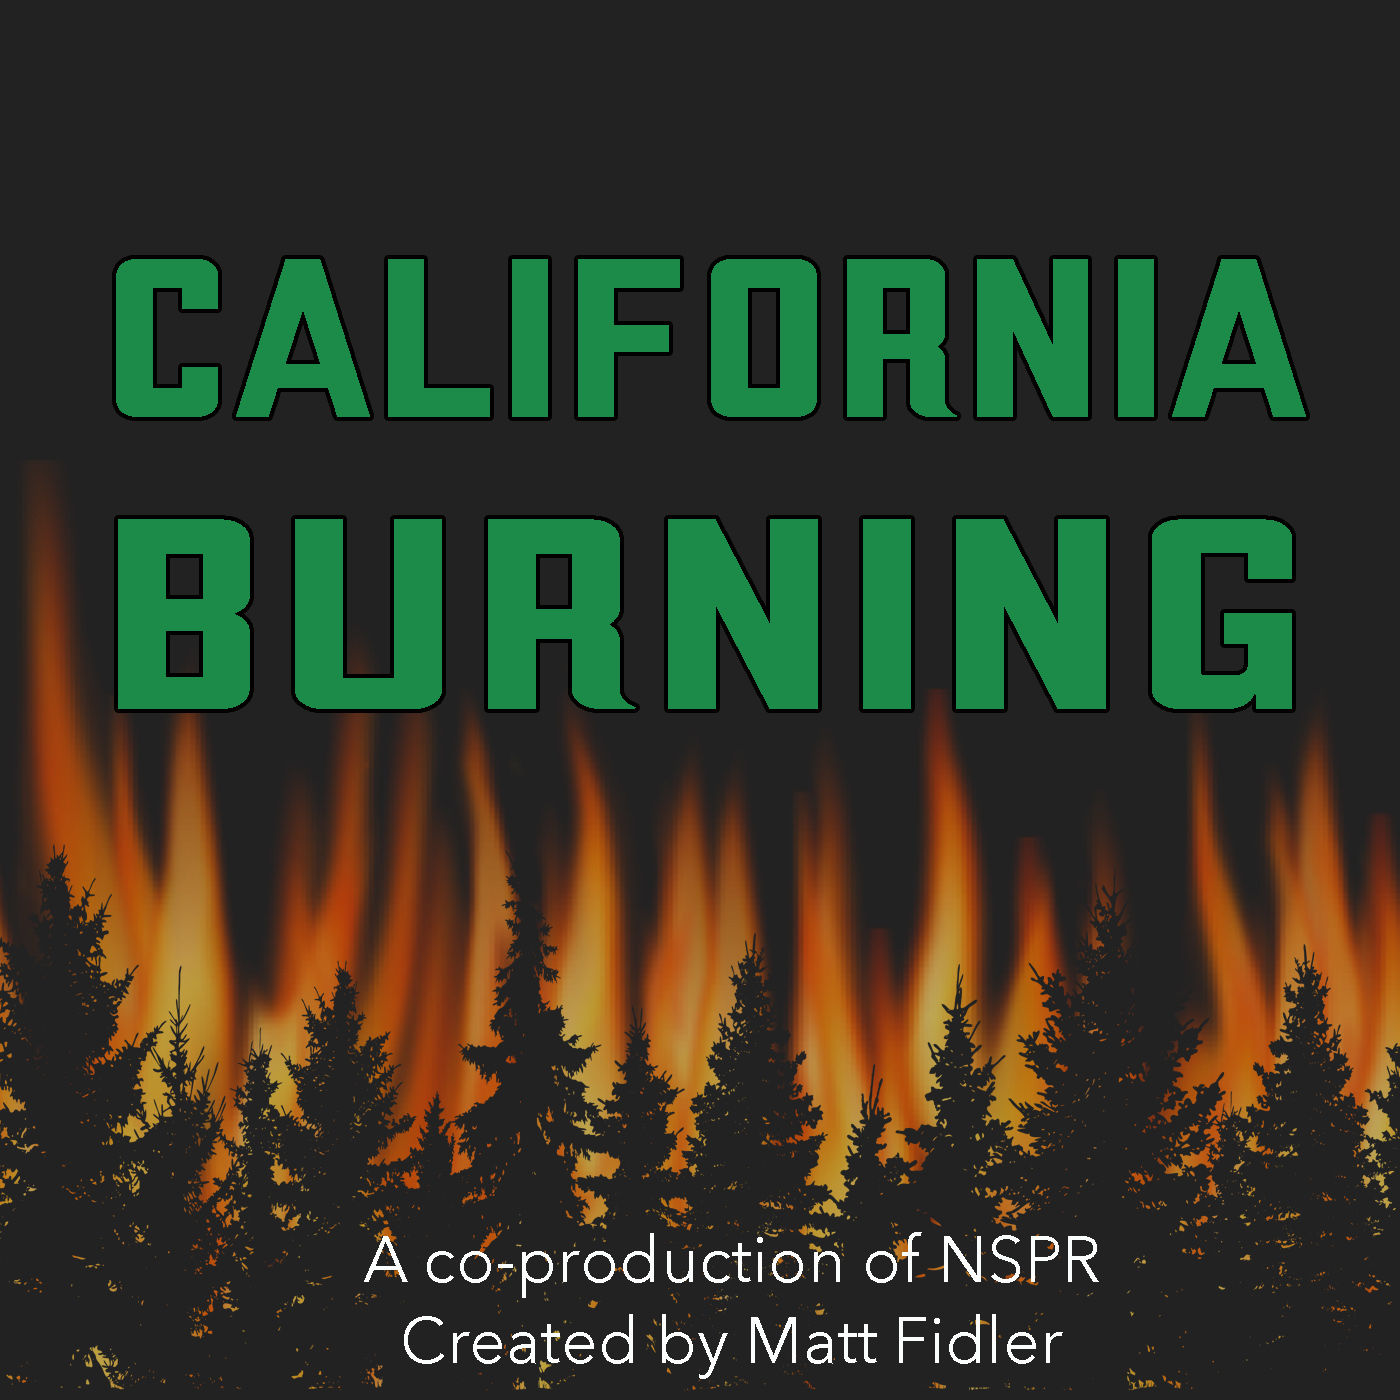 Logo of California Burning with digital illustrations of pine trees and fire in the background.